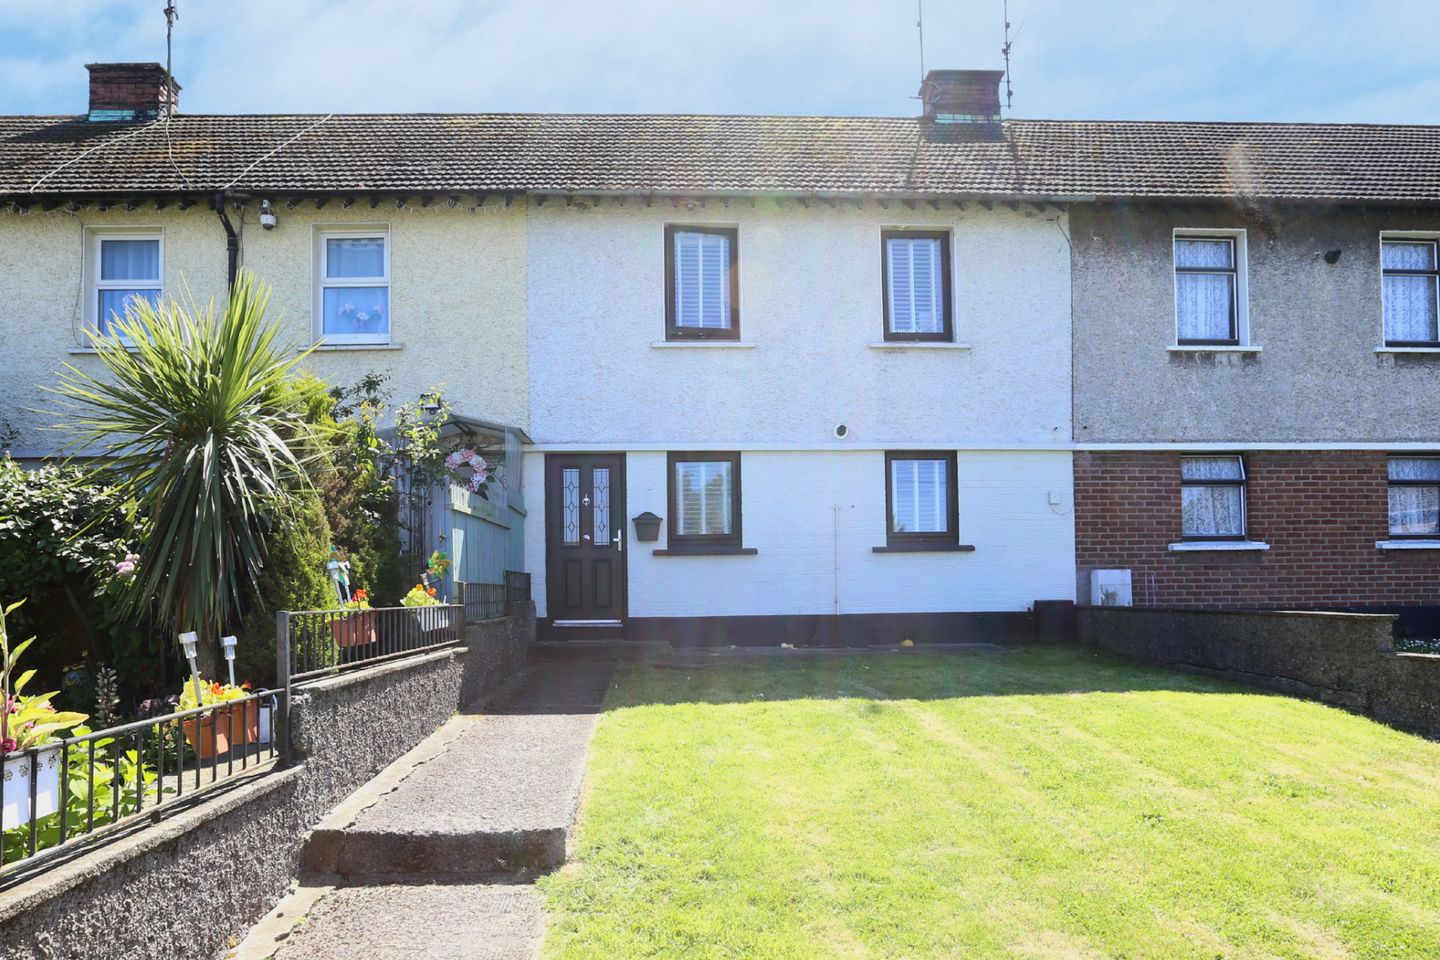 31 Ascal A Tri, Yellowbatter, Drogheda, Co. Louth